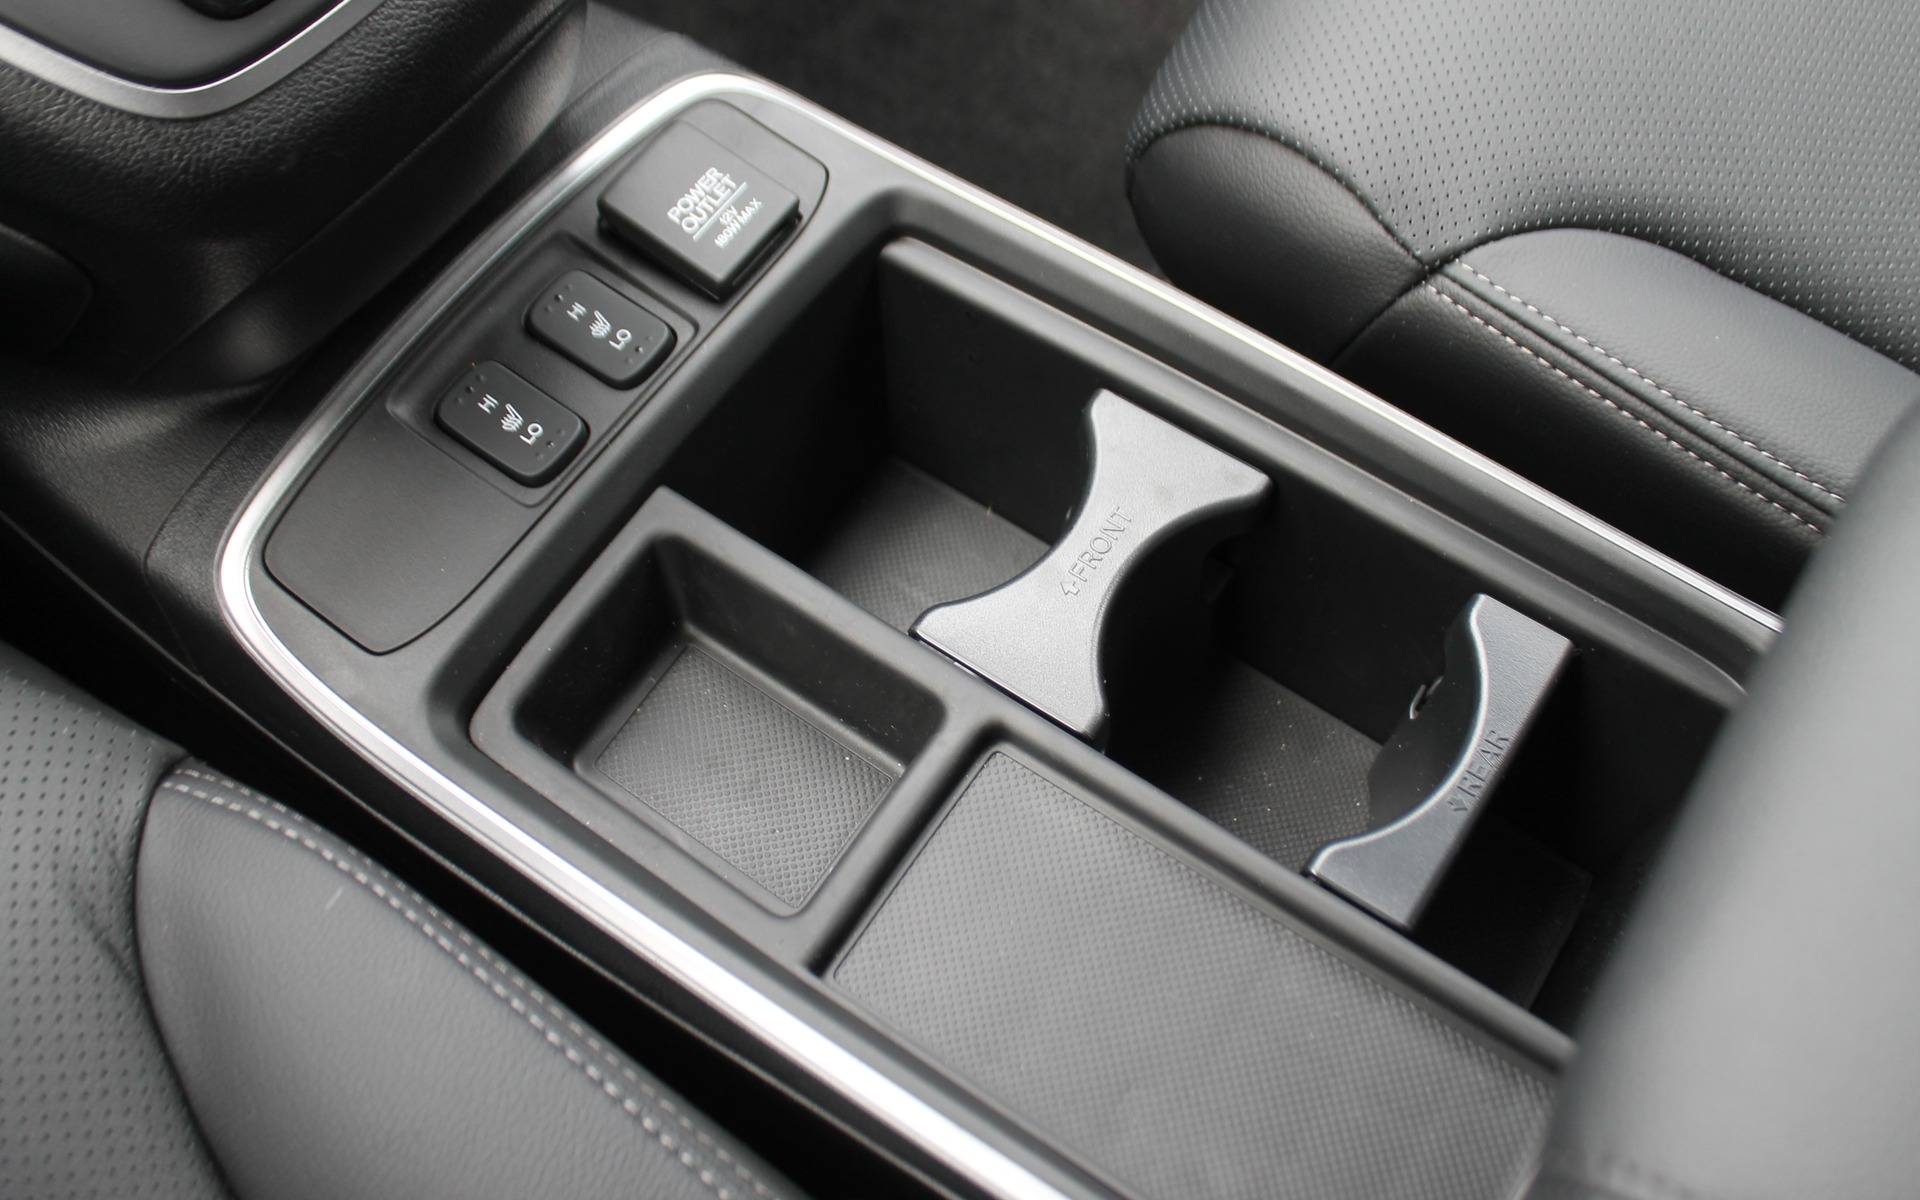 The centre console is now configurable.